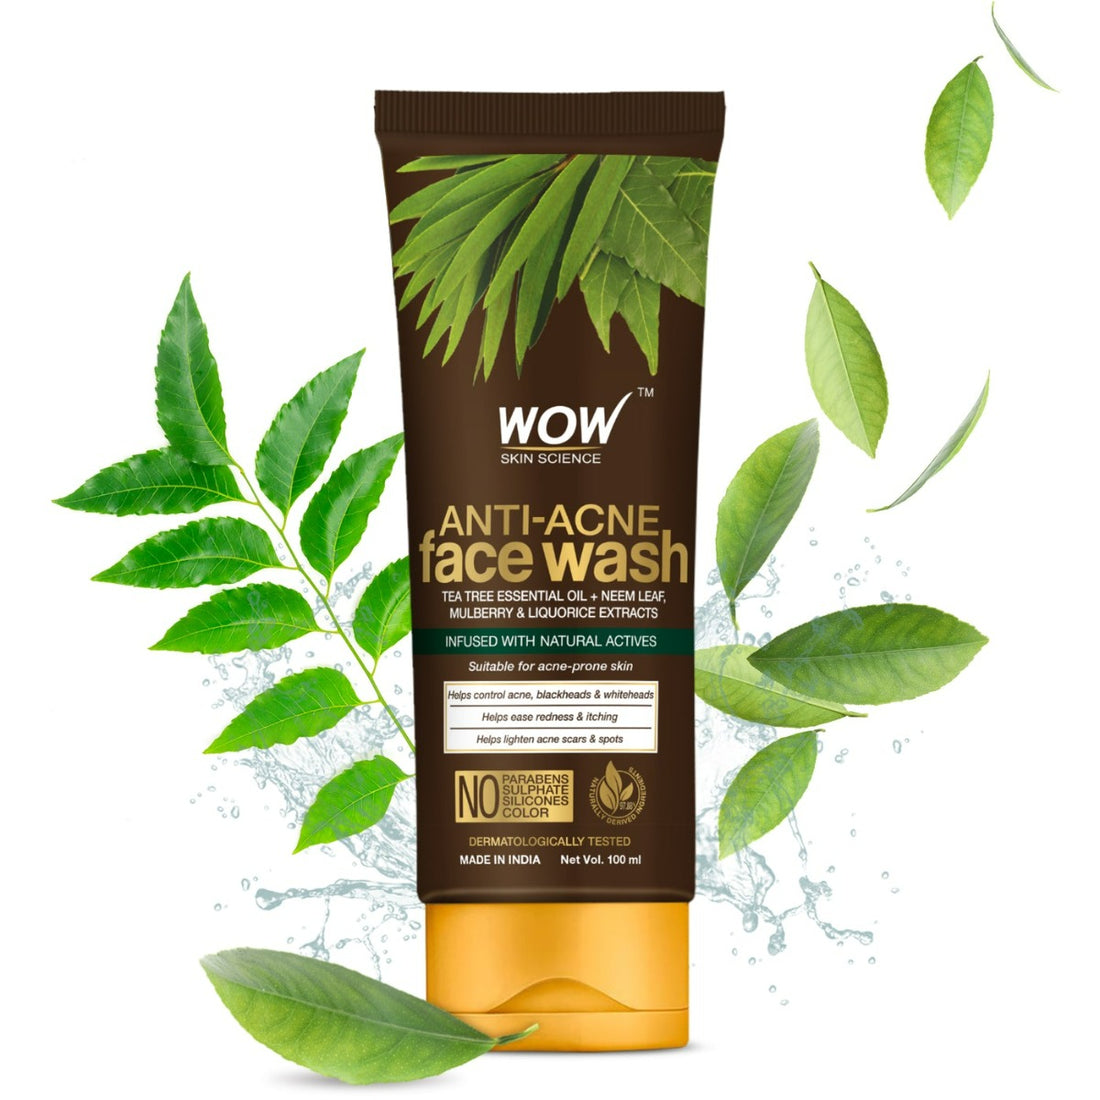 Wow Skin Science Anti Acne Face Wash (100ml)